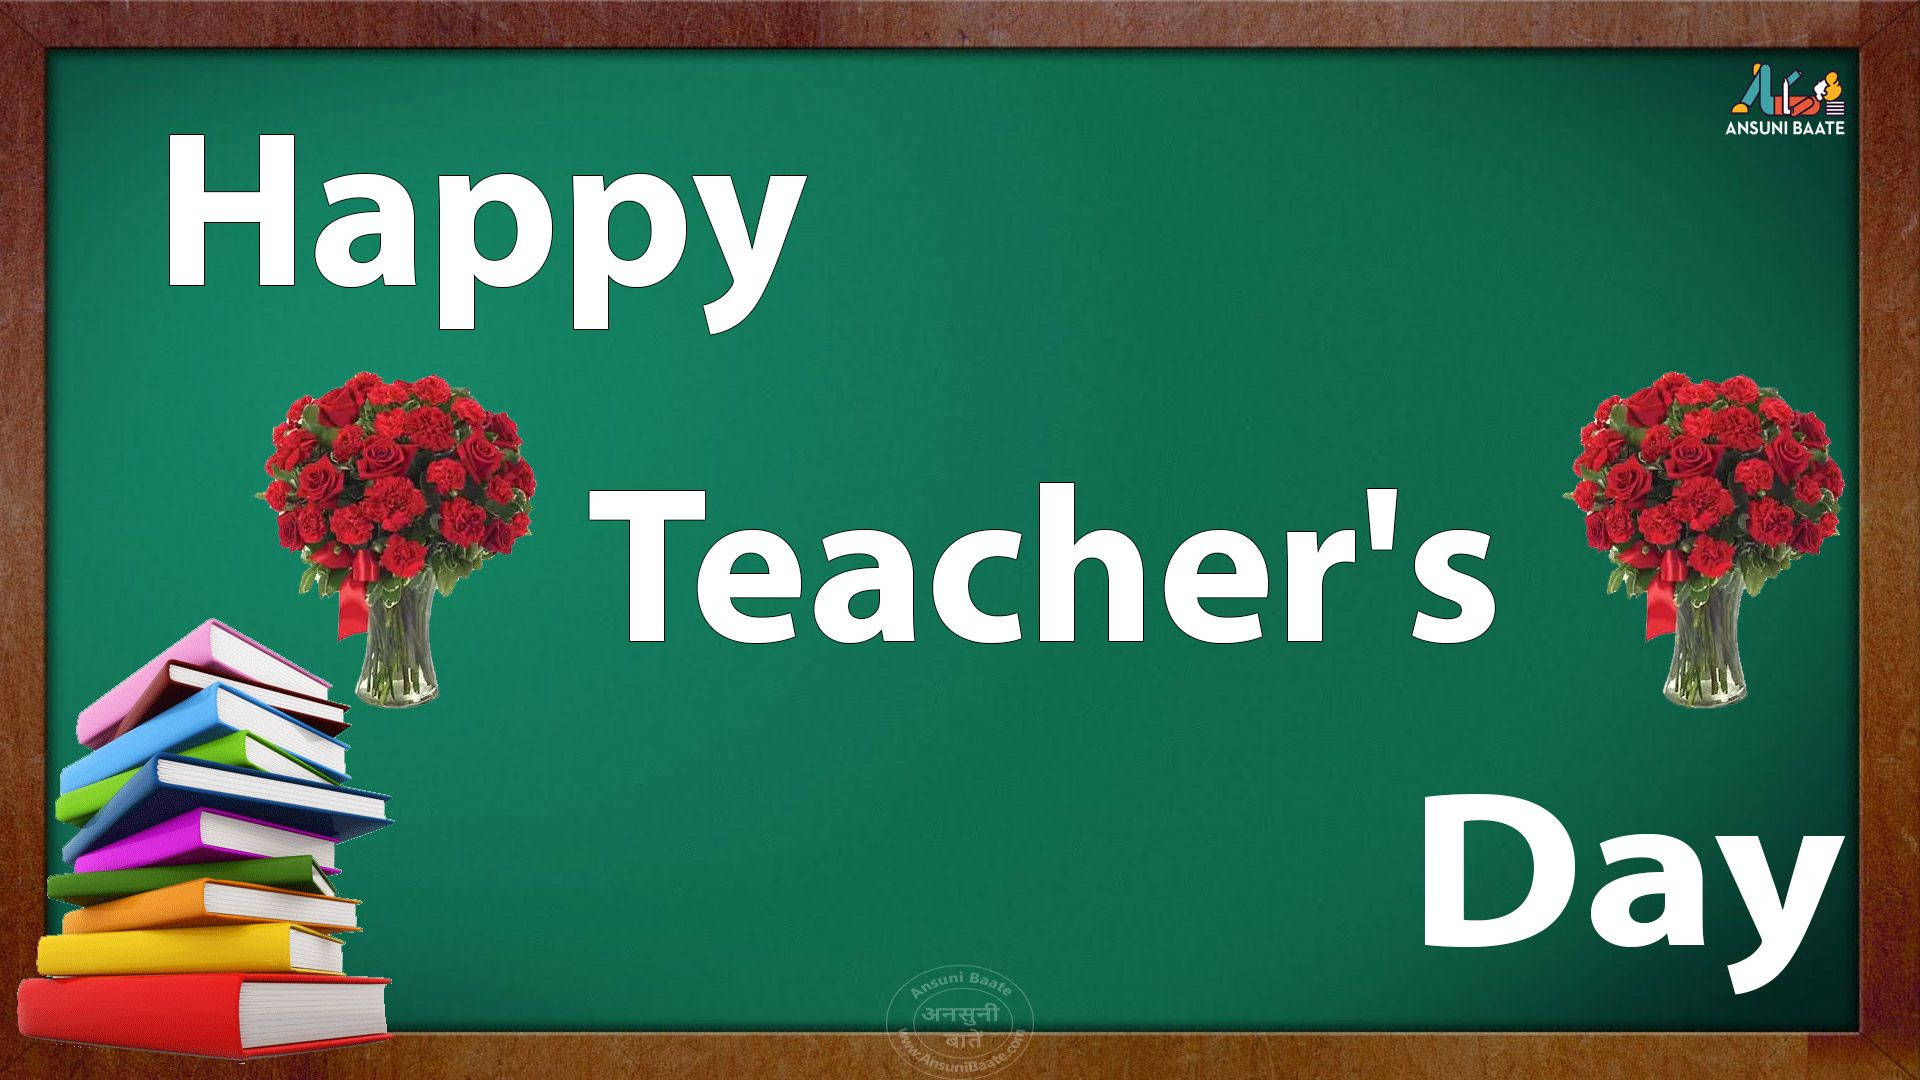 Happy Teachers' Day Books And Roses Wallpaper